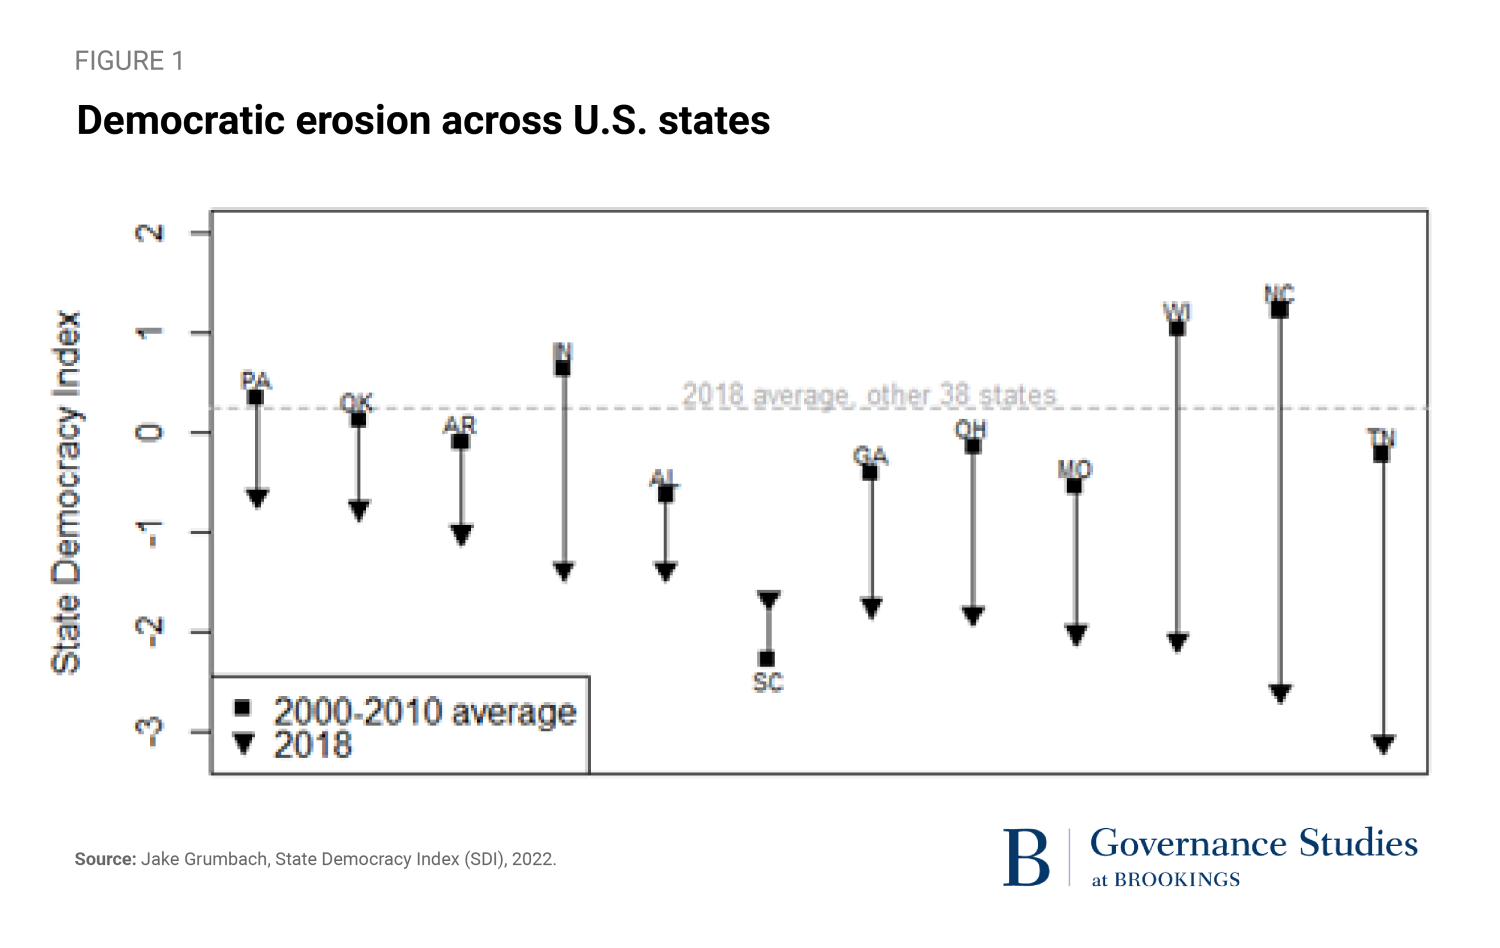 Democratic erosion across U.S. states. Arrows and state labels show extent of erosion by length of arrows.